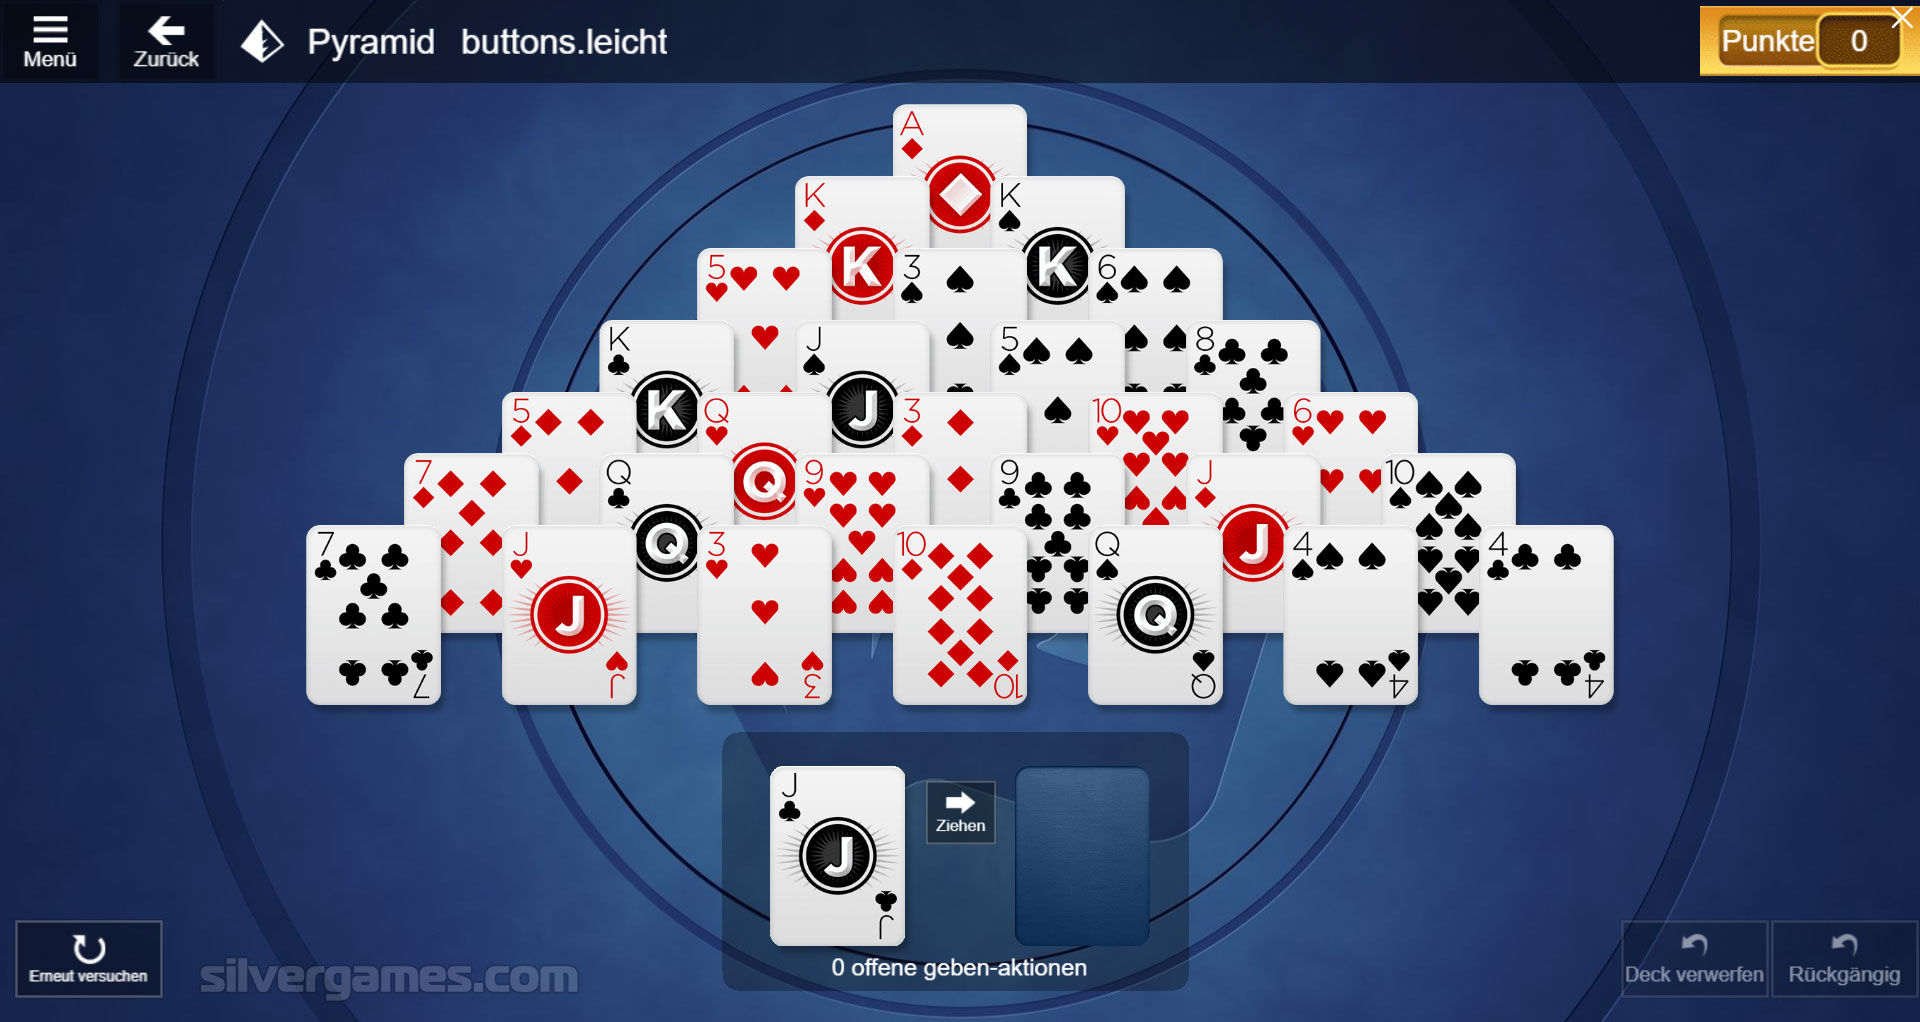 Microsoft Solitaire Collection - Solitaire Games Online